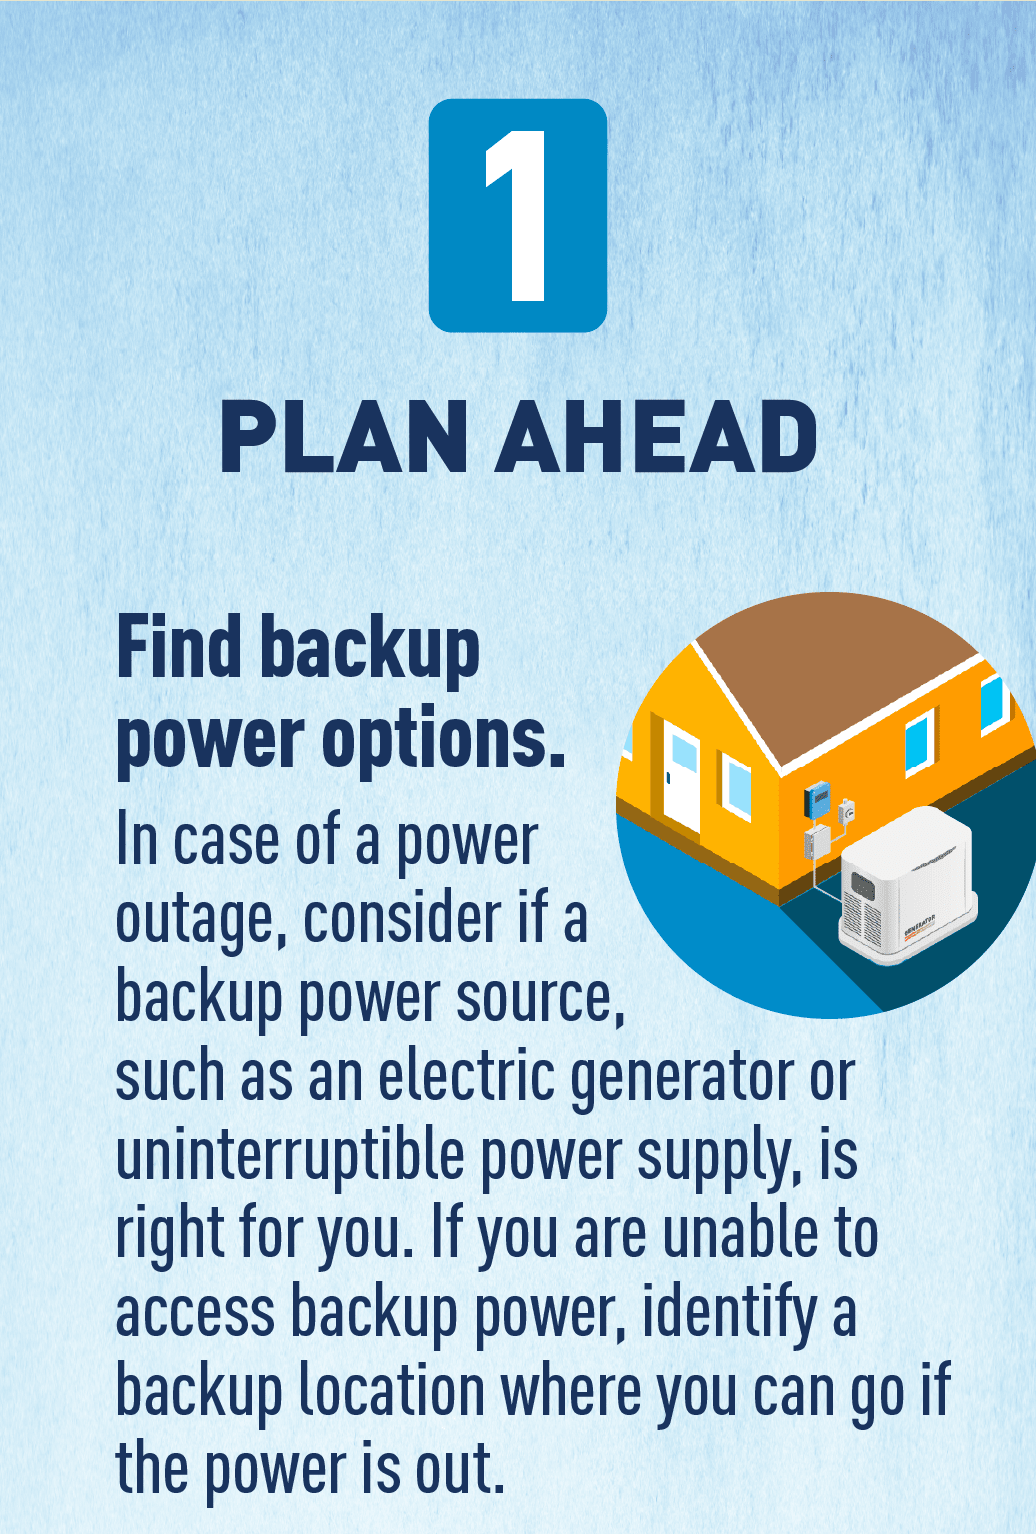 Image: House with back-up power. Text: PLAN AHEAD Find backup power options. In case of a power outage, consider if a backup power source, such as an electric generator or uninterruptible power supply, is right for you. If you are unable to access backup power, identify a backup location where you can go if the power is out.